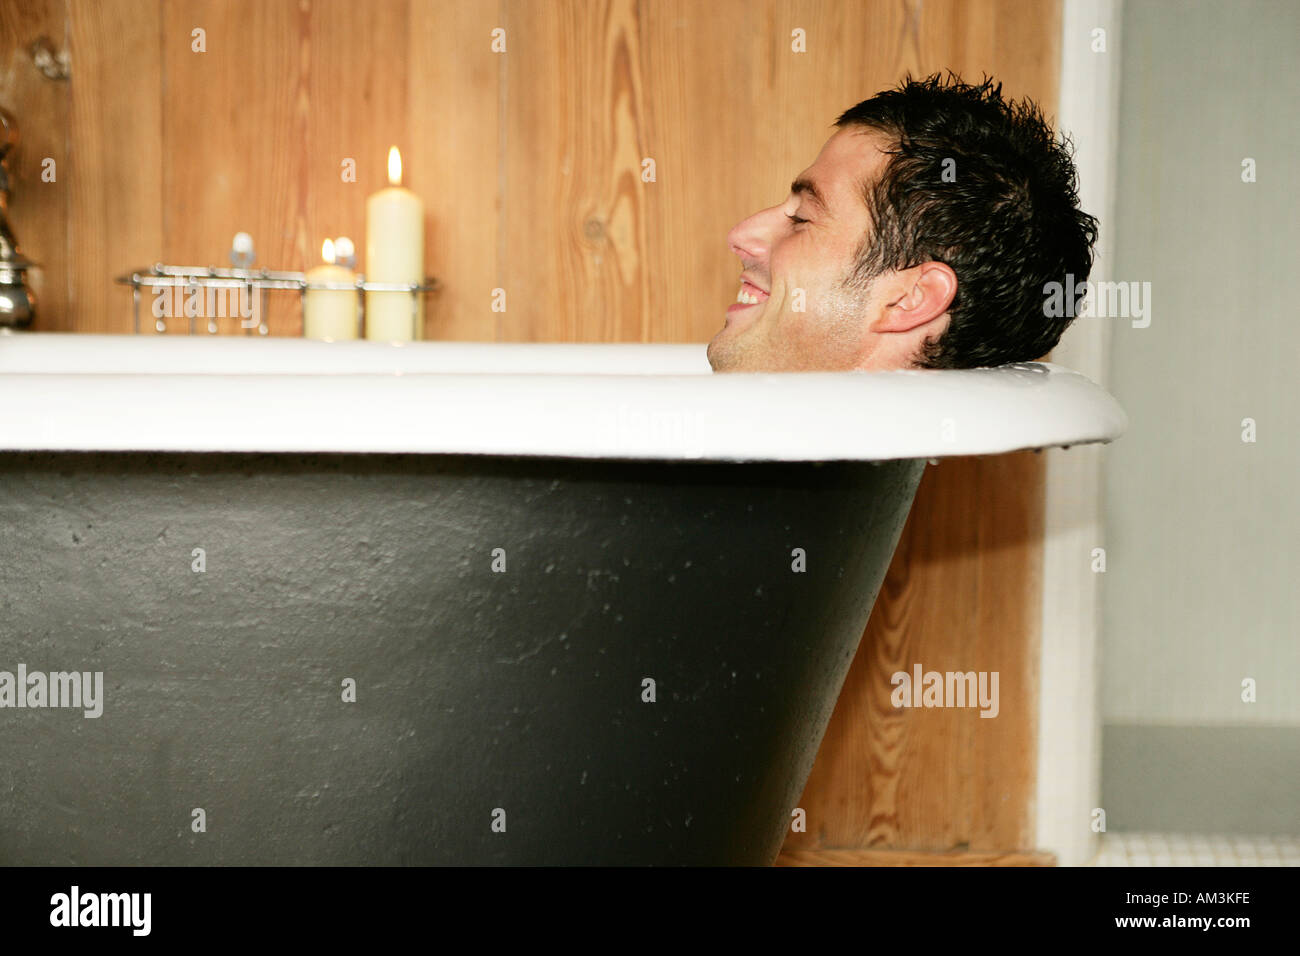 Man in roll top bath smiling Stock Photo